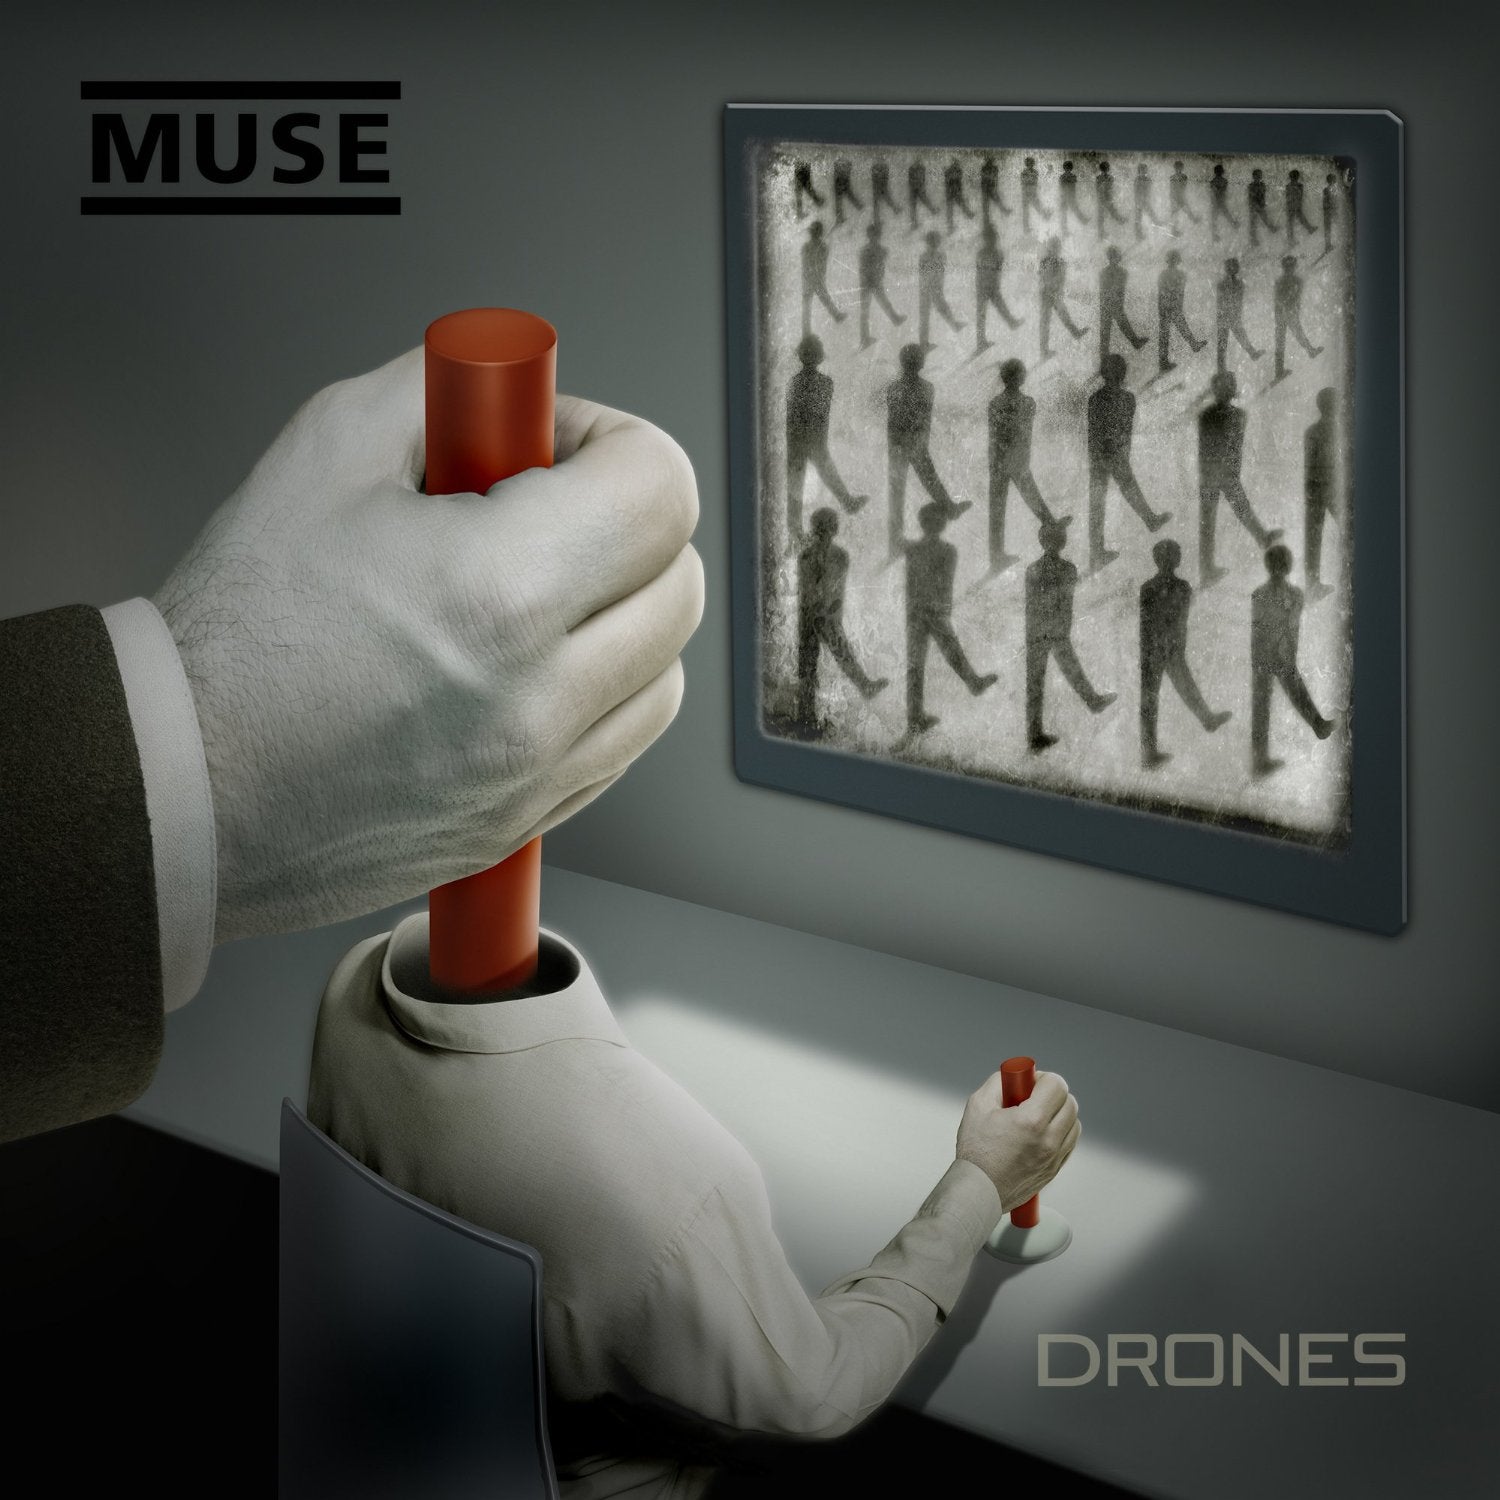 Muse "Drones" CD